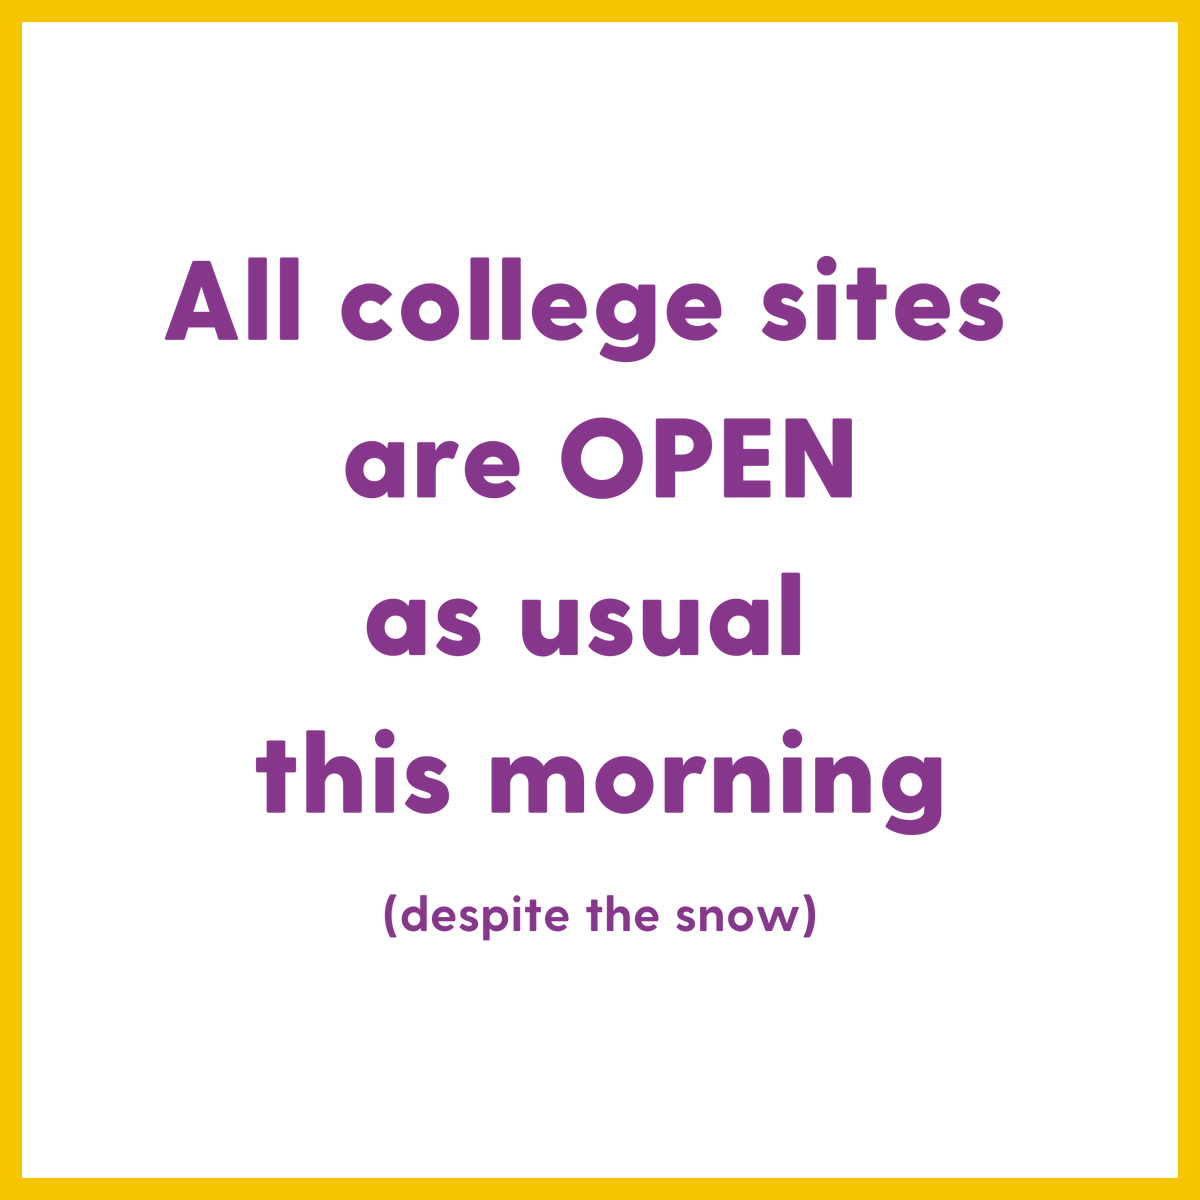 All sites are open as usual. Following the snowfall overnight in London, all our sites are open this morning as usual.